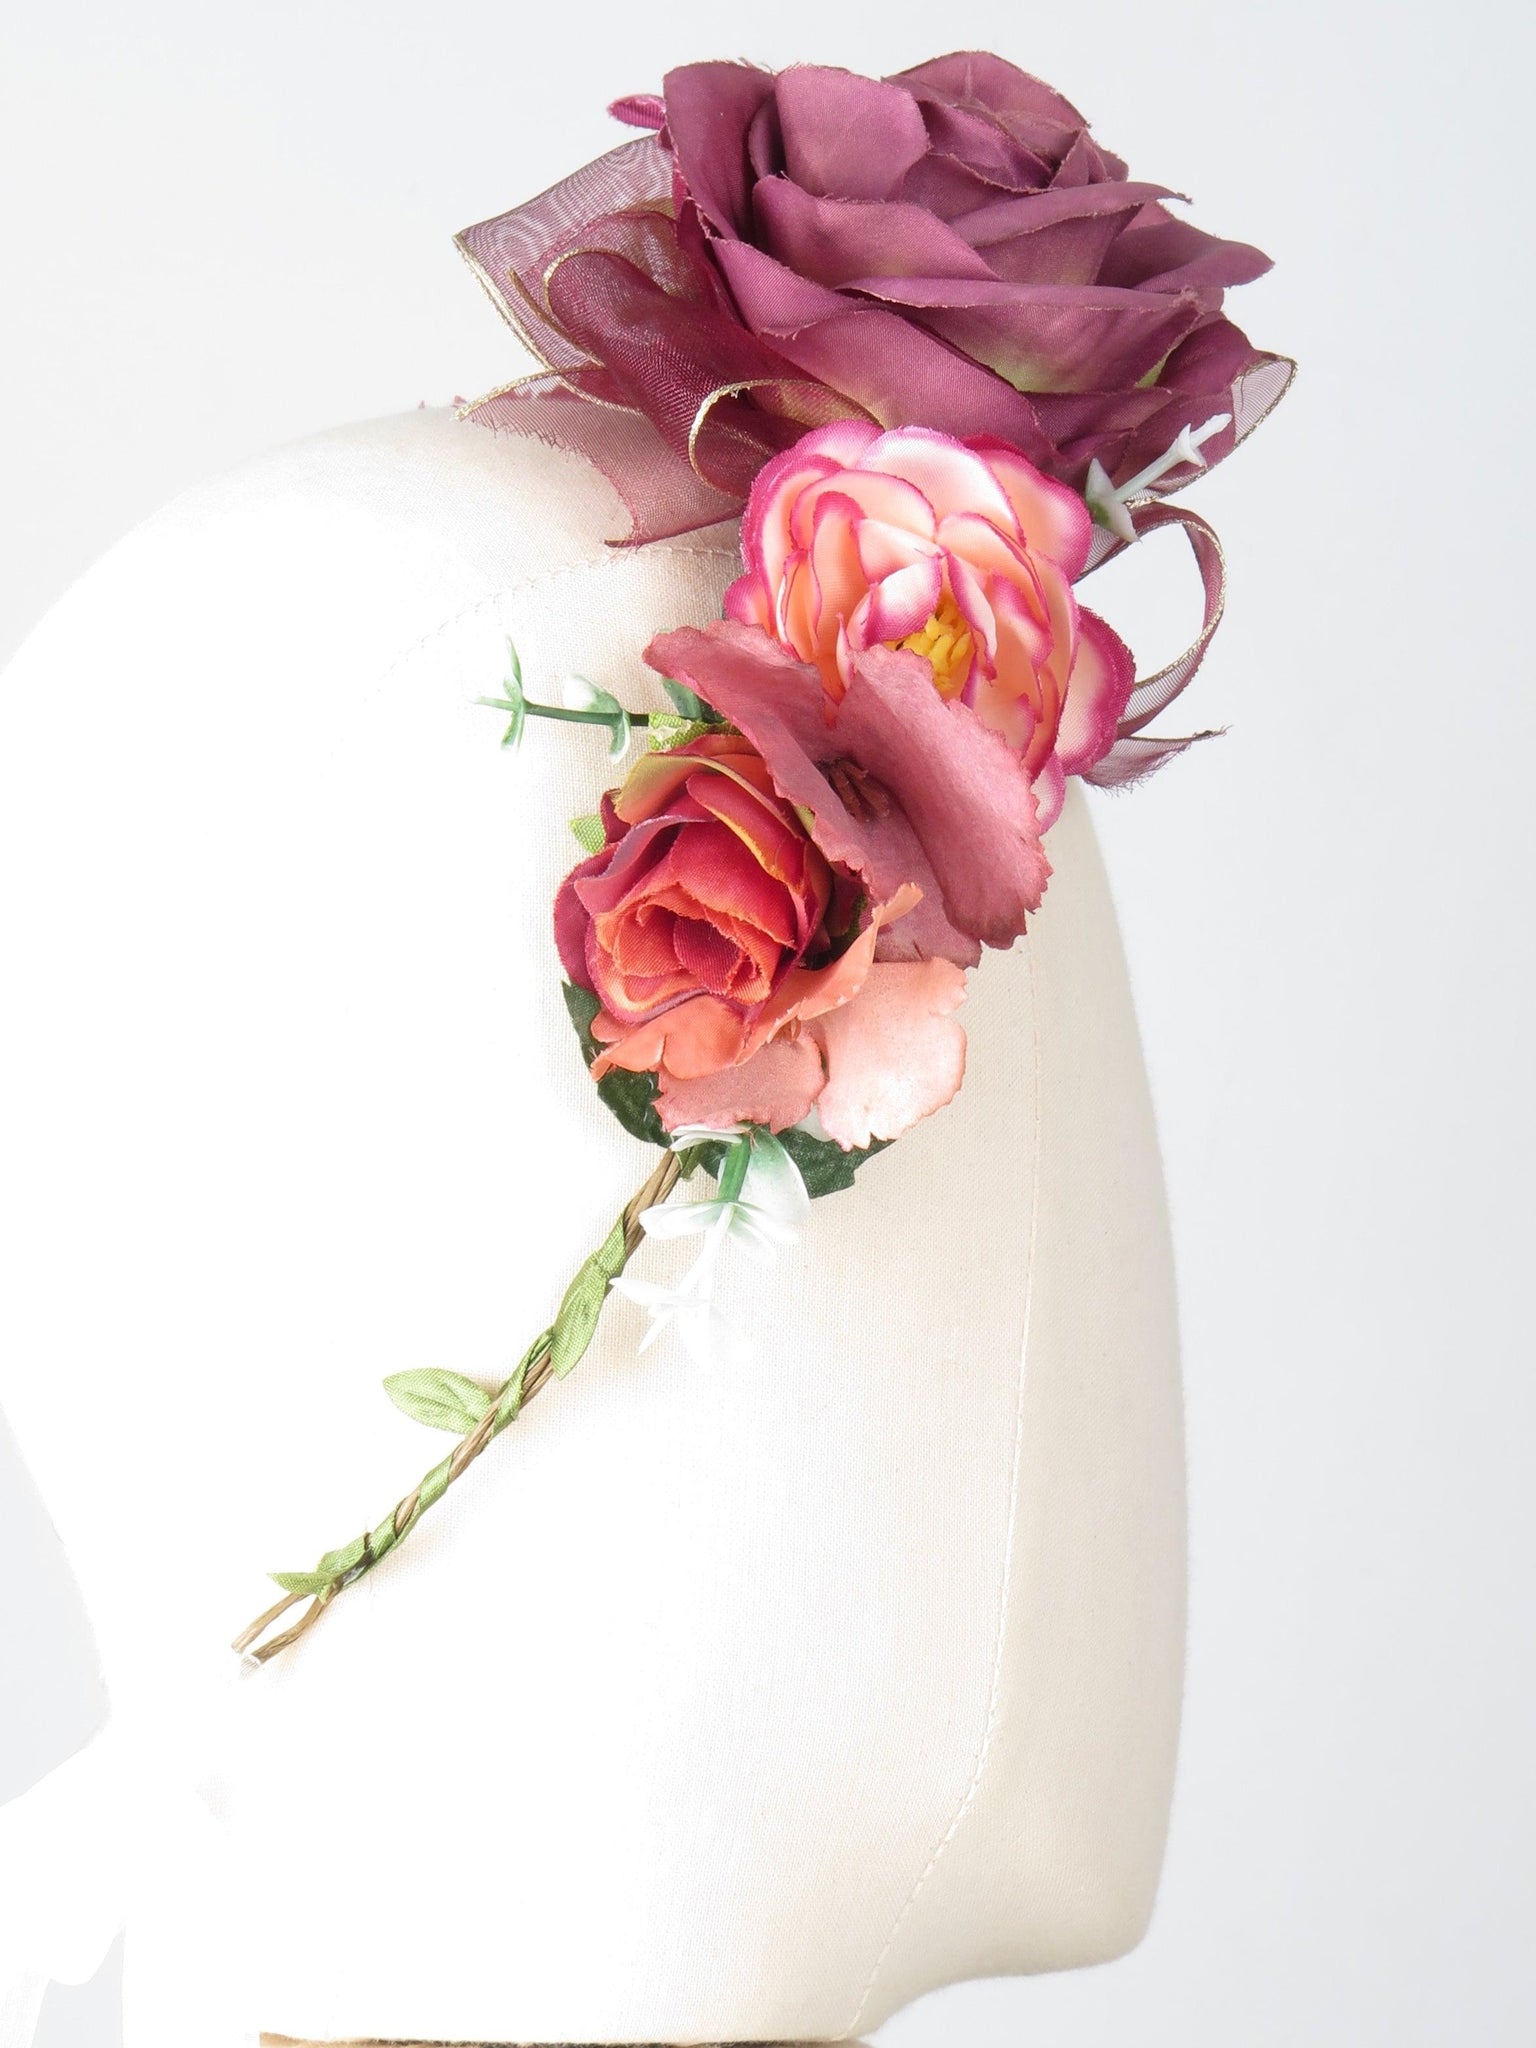 New Floral Vintage Style Headpiece Wine & Pink - The Harlequin